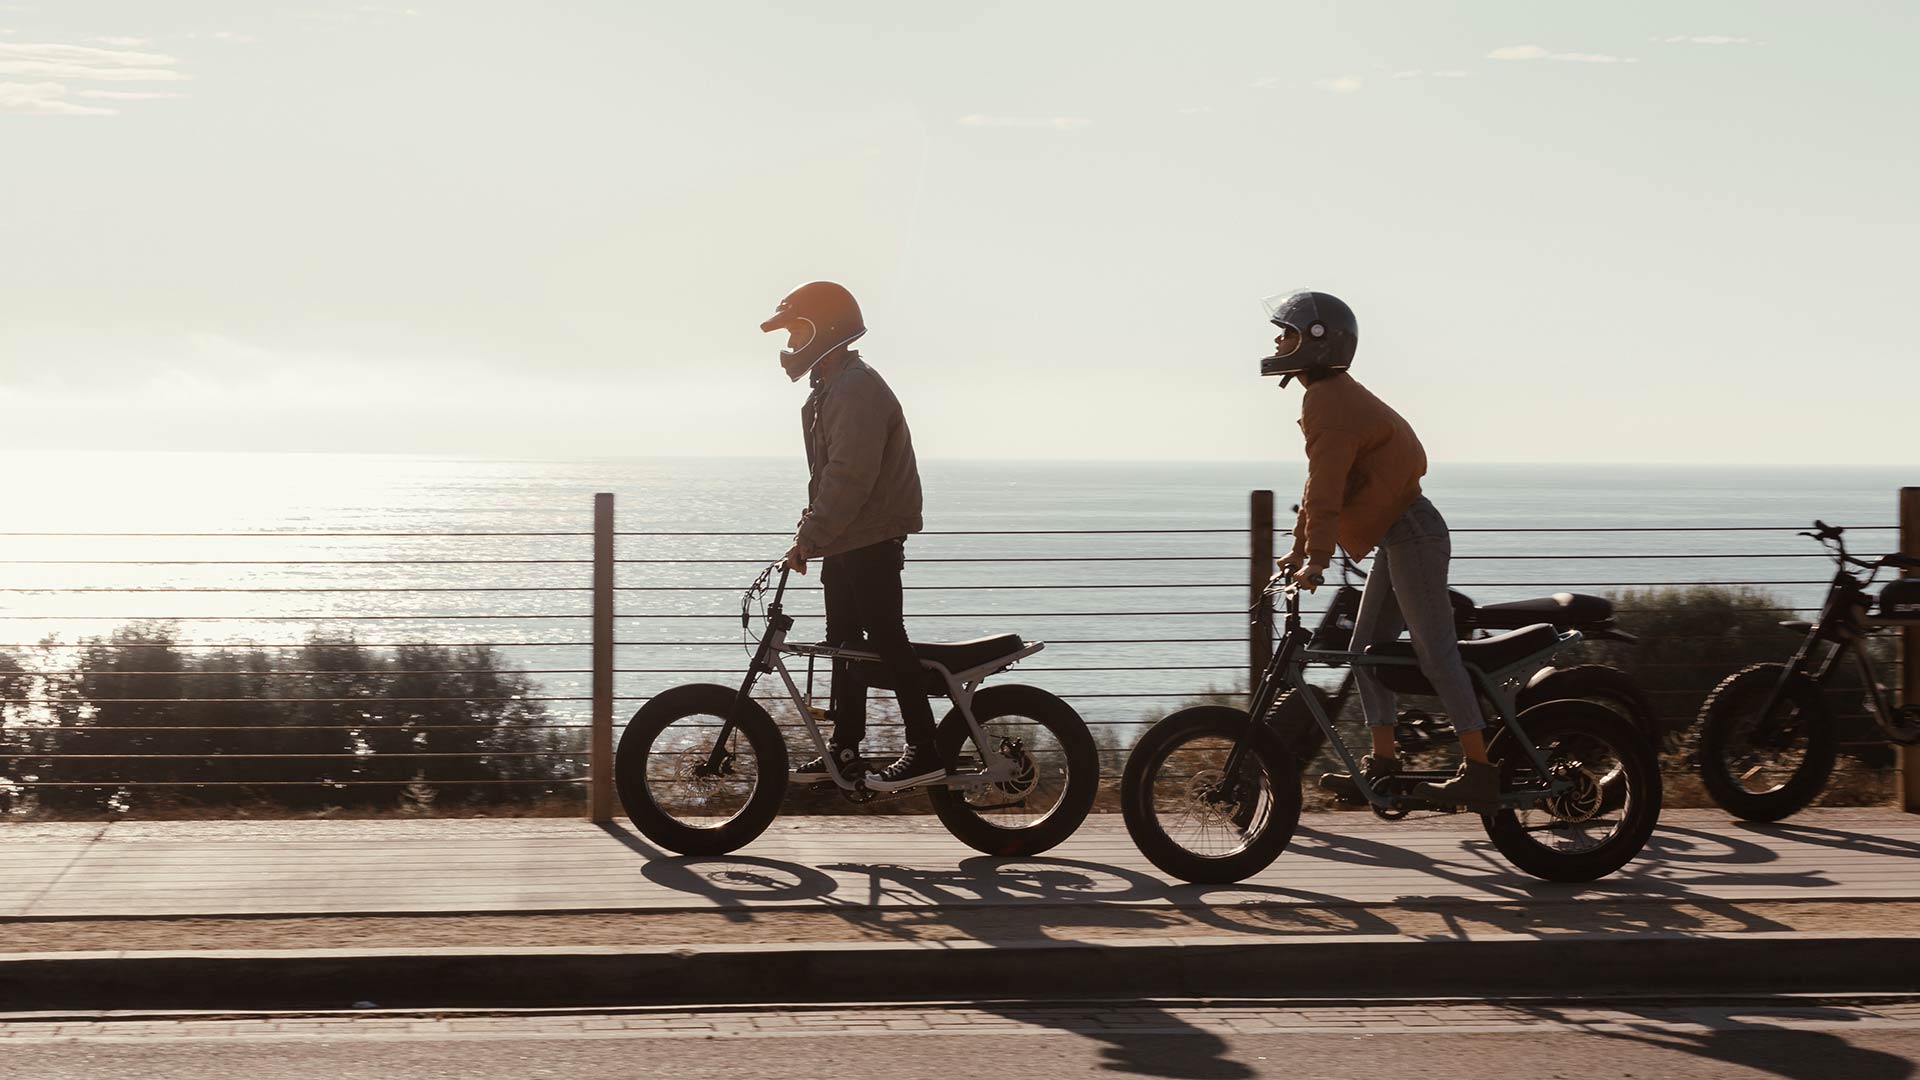 Two Super73 ebike riders out for a scenic ride overlooking the coast